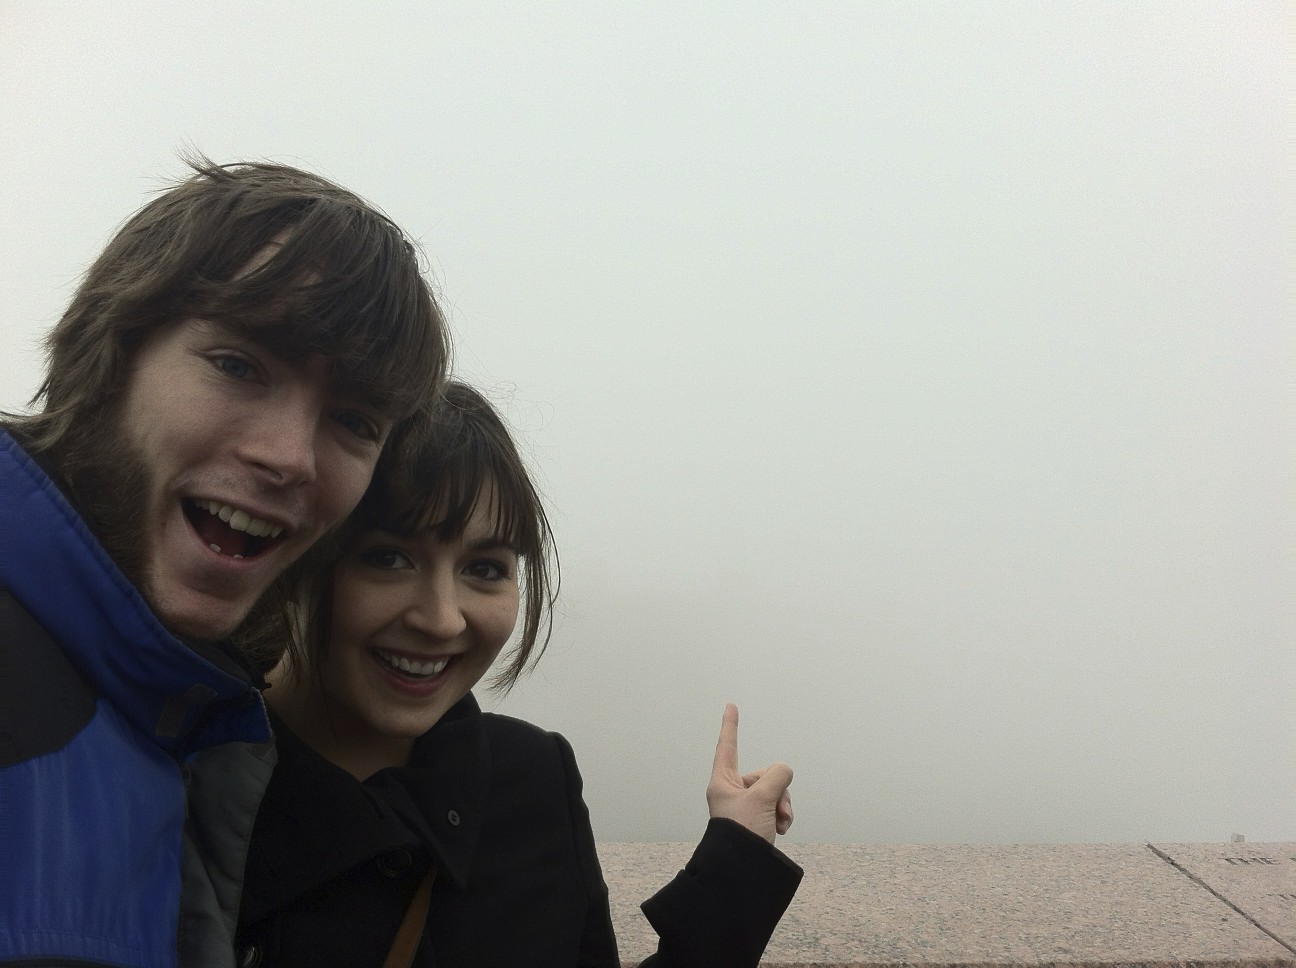 In front of the golden gate bridge... It shows so much, yet we can't see anything